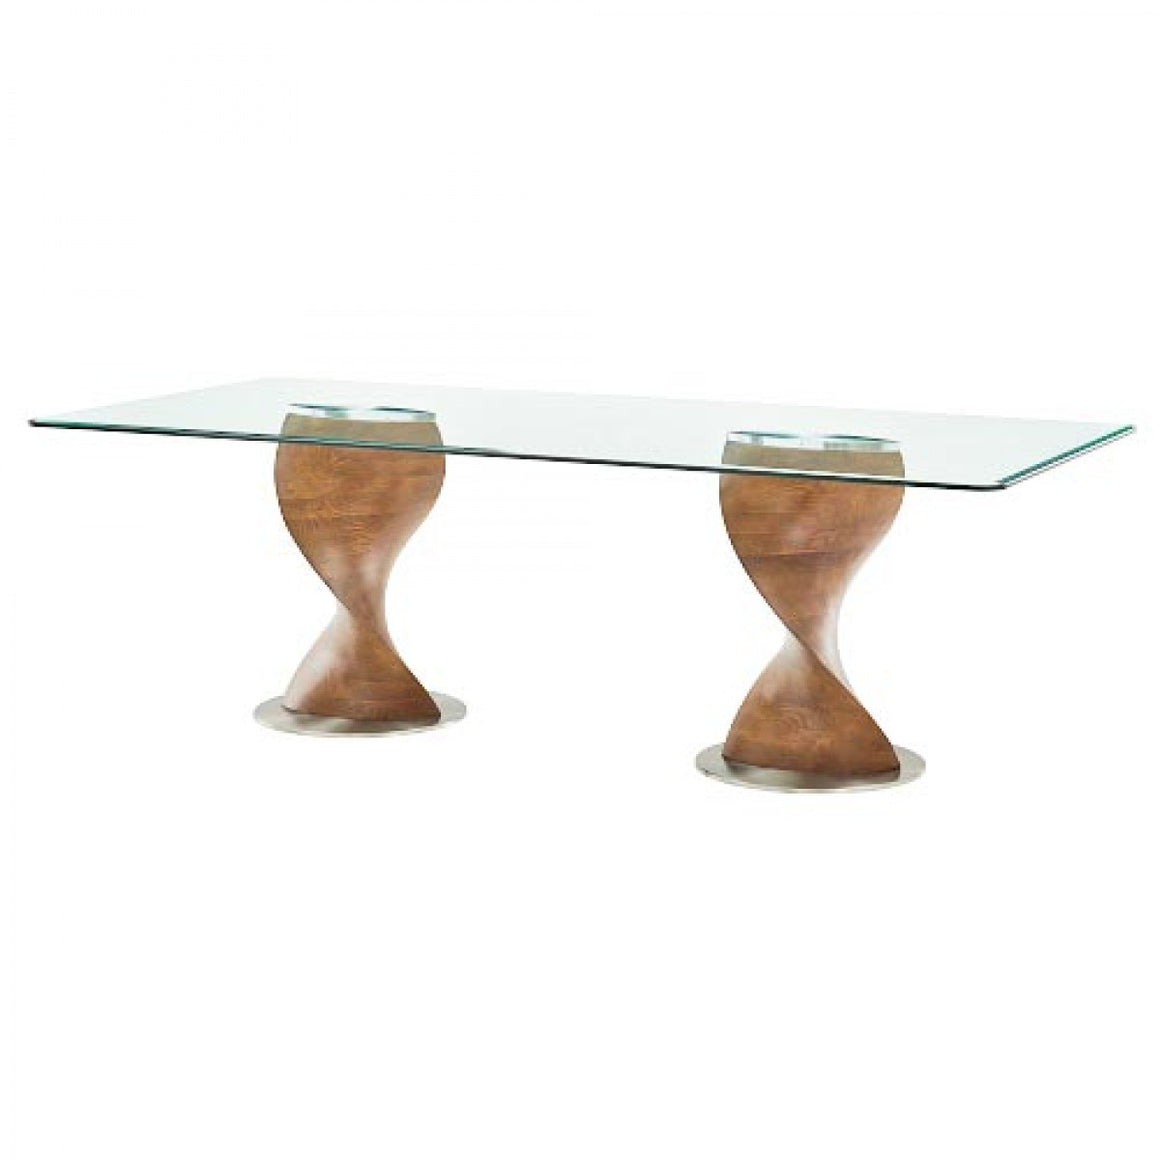 Modrest Cleveland - Contemporary Glass and Walnut Dining Table